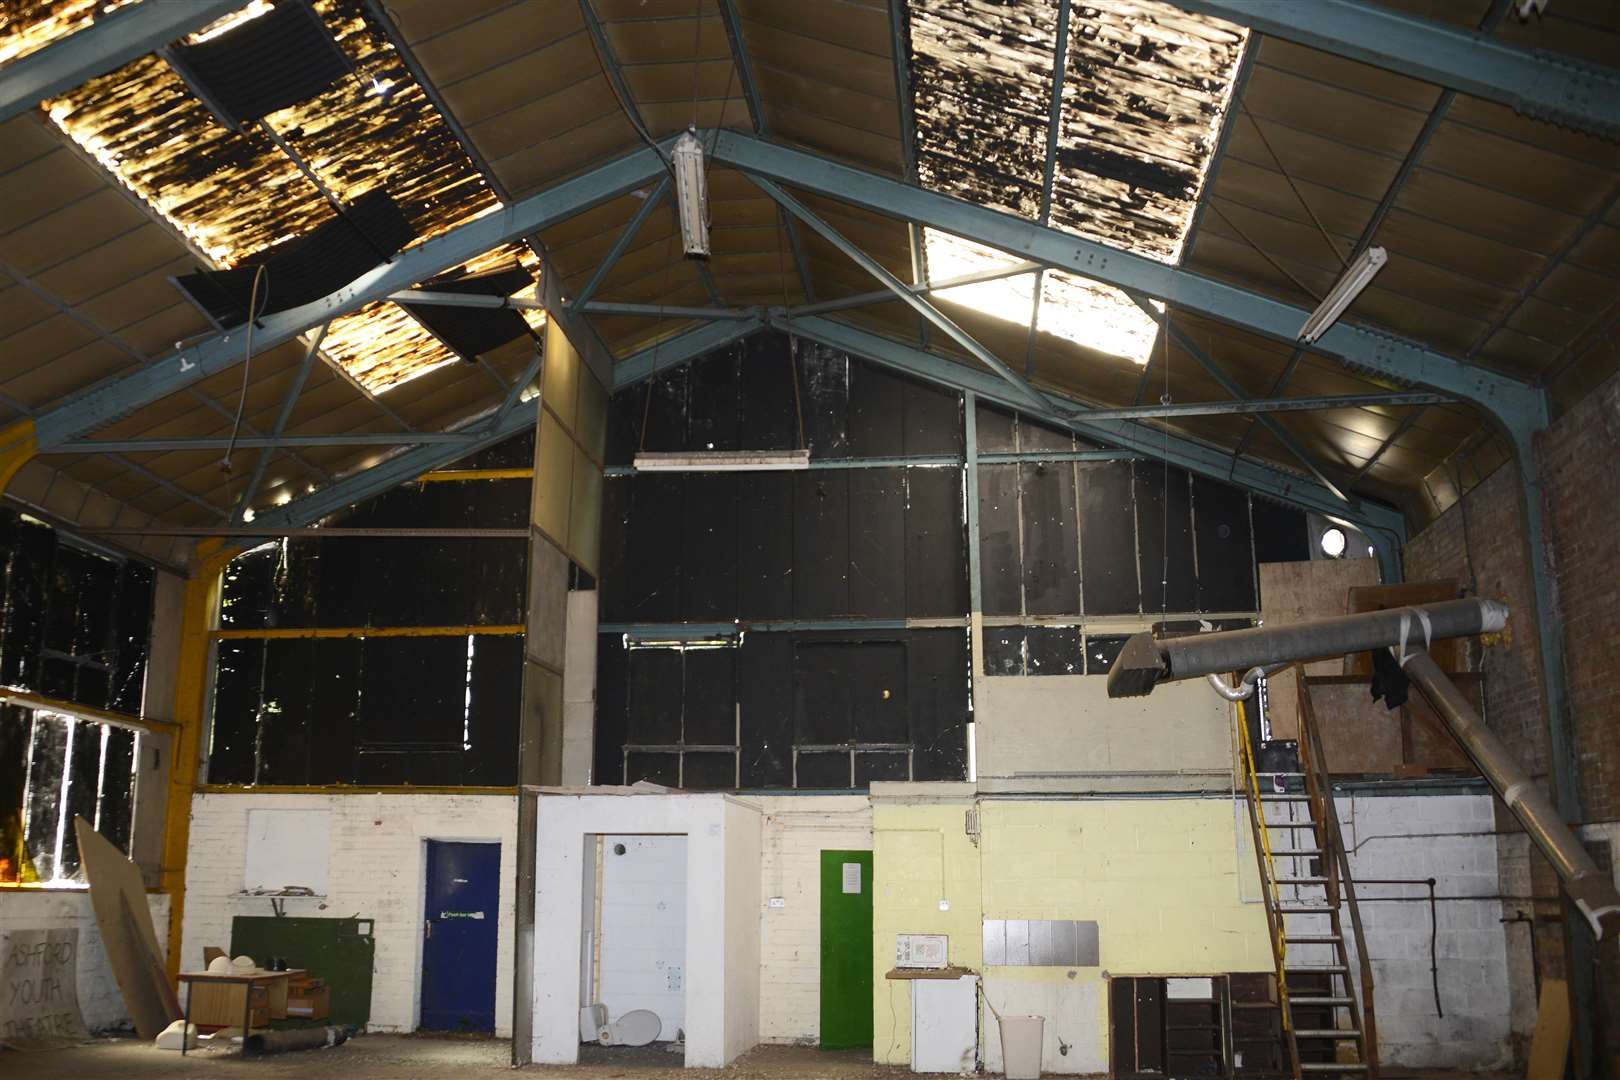 The former Ashford Youth Theatre site has seen better days, but will soon be restored back to its former glory as a performance space. Picture: Paul Amos